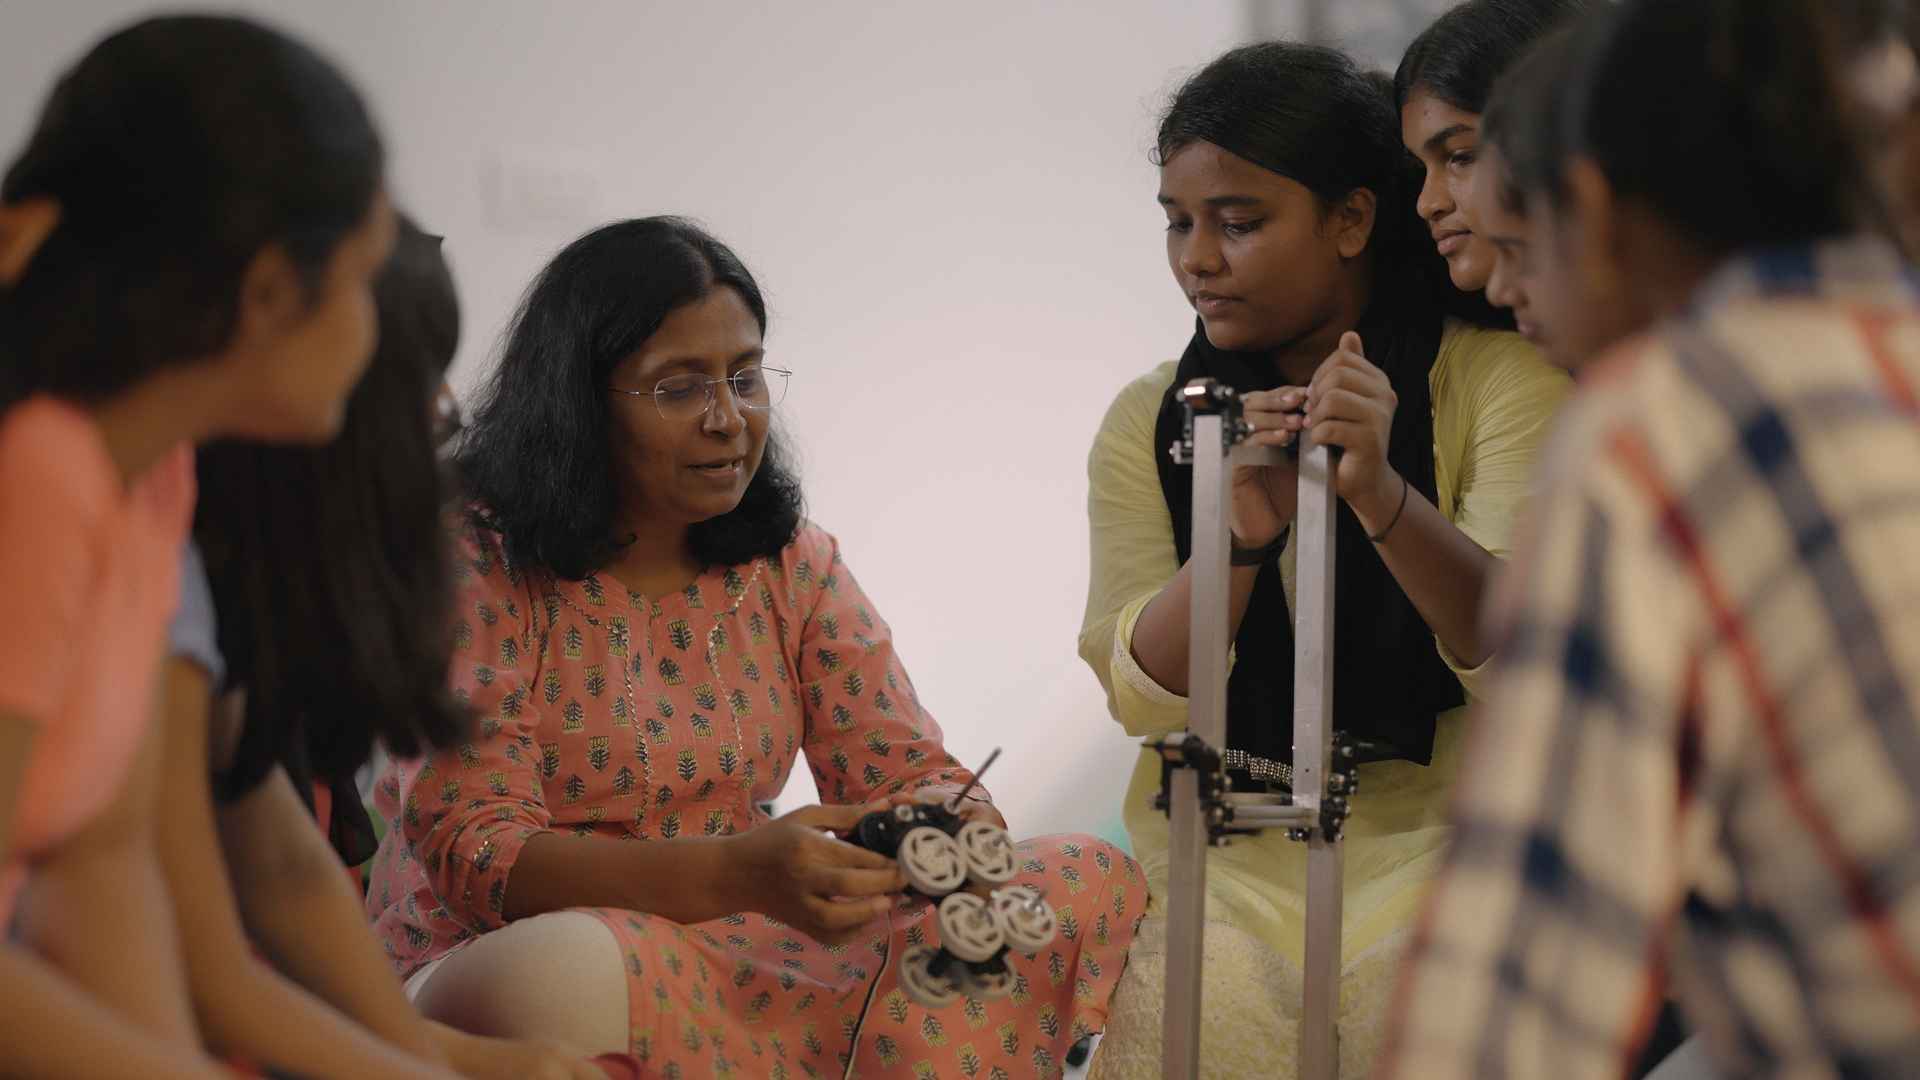 Meenal Majumder from The Innovation Story works with children on their quest to build a robot